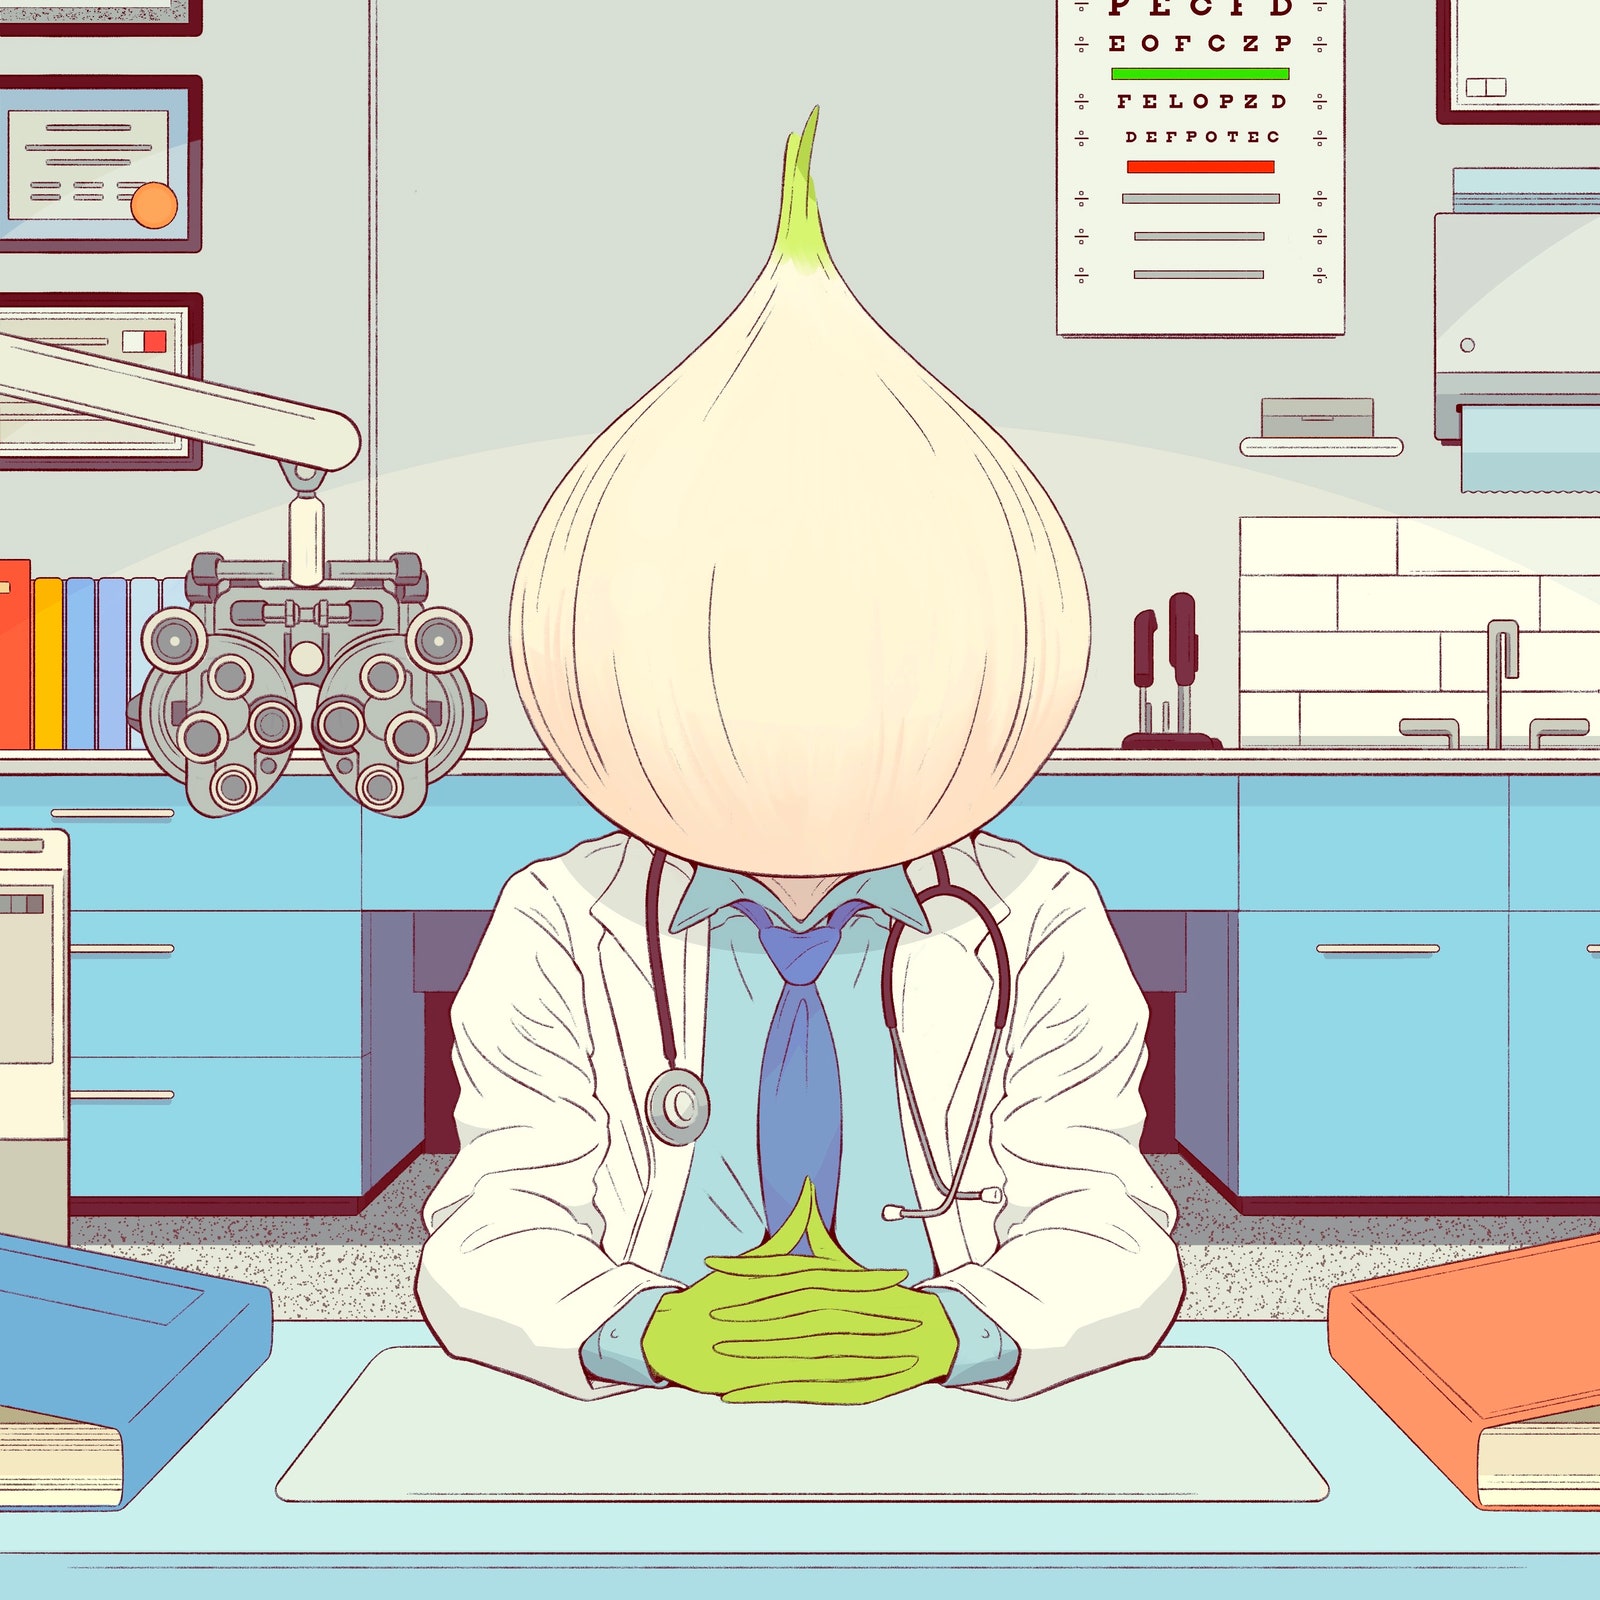 A doctor made of an onion sits across the desk intimidatingly.